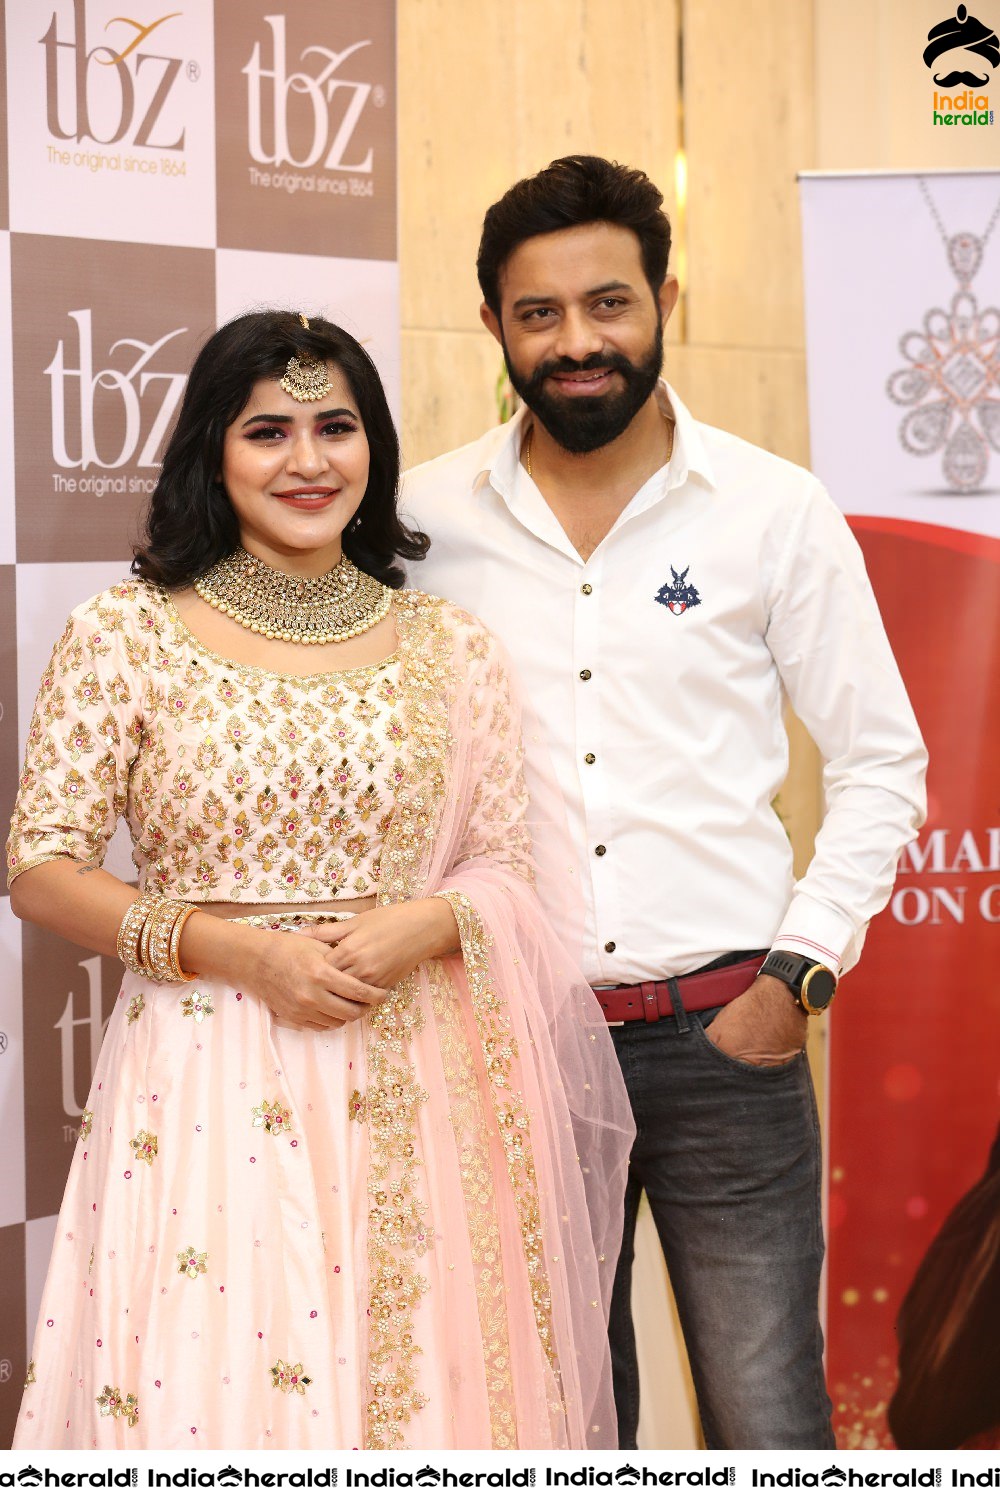 TBZ The Original new festive collections unveils by Filmy Celebrities Set 1